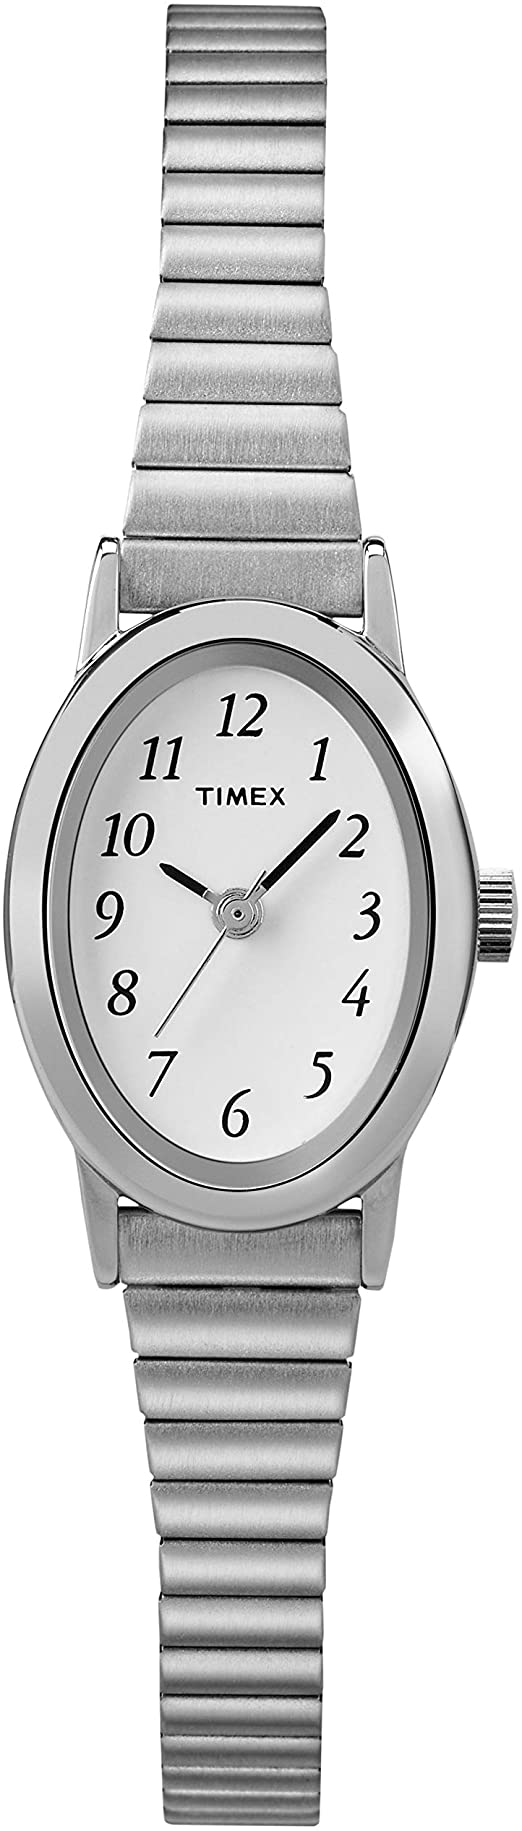 Timex Cavatina Expansion Band Watch T21902